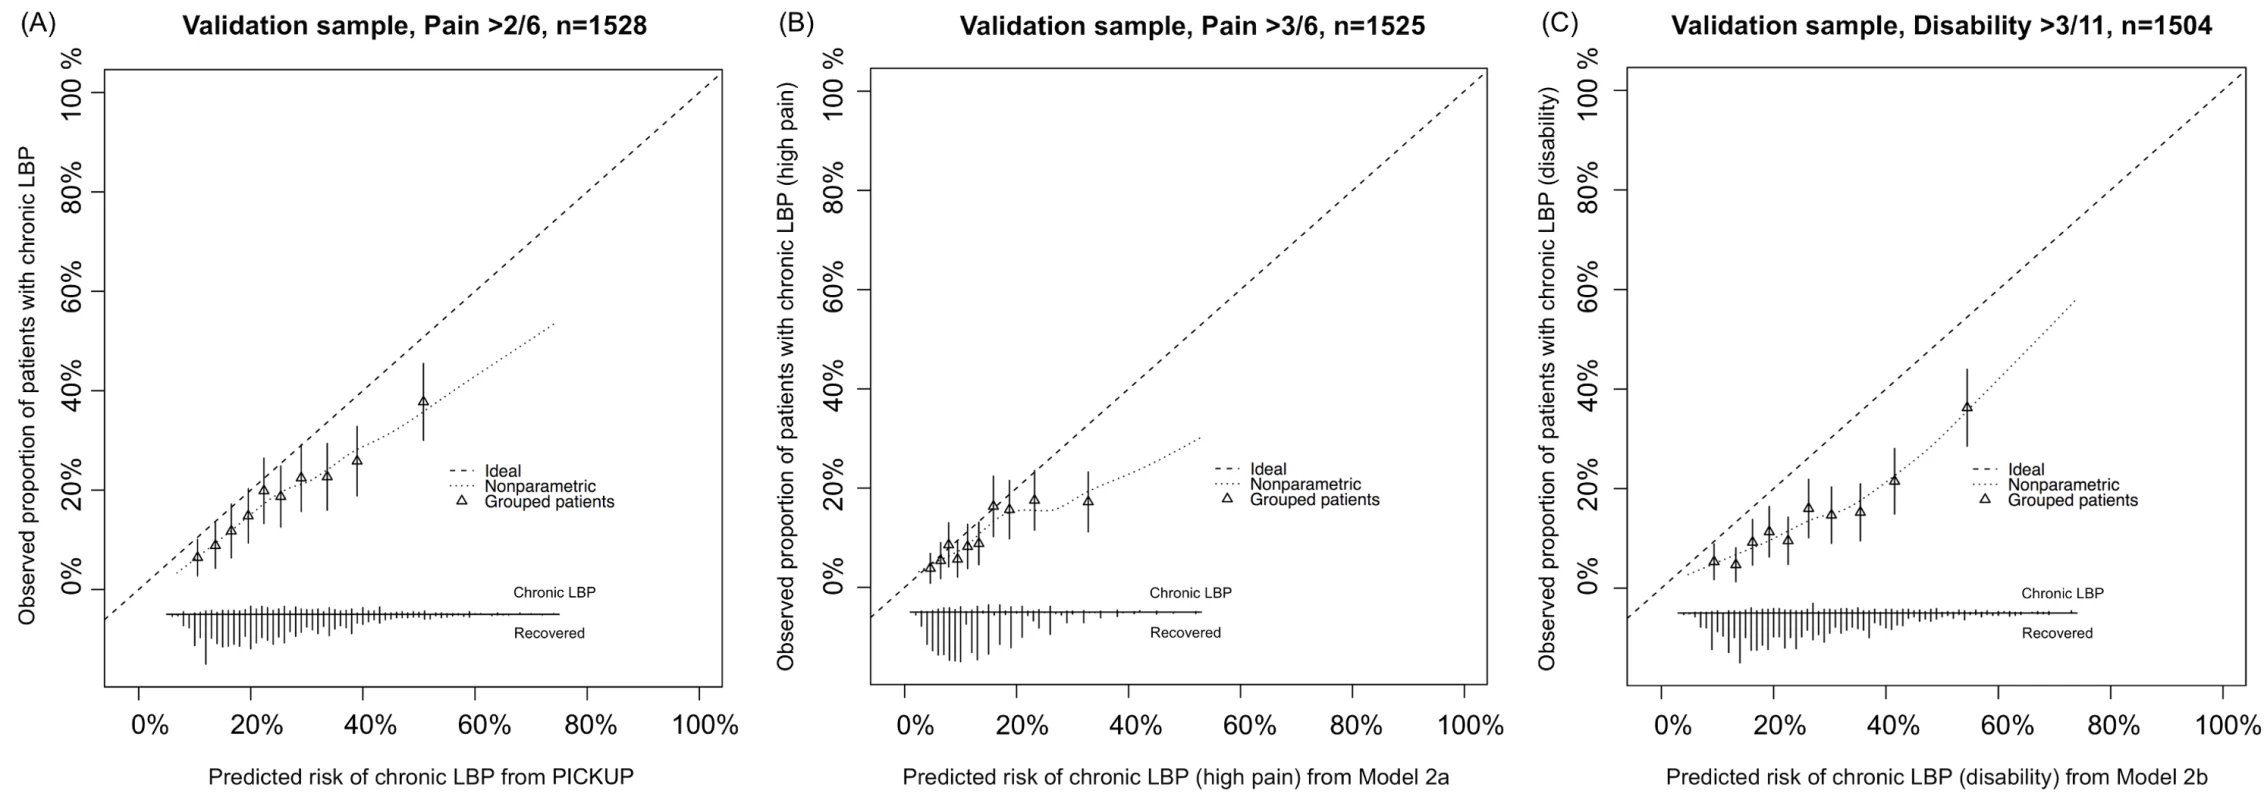 Calibration plots showing external validity of the three prognostic models.